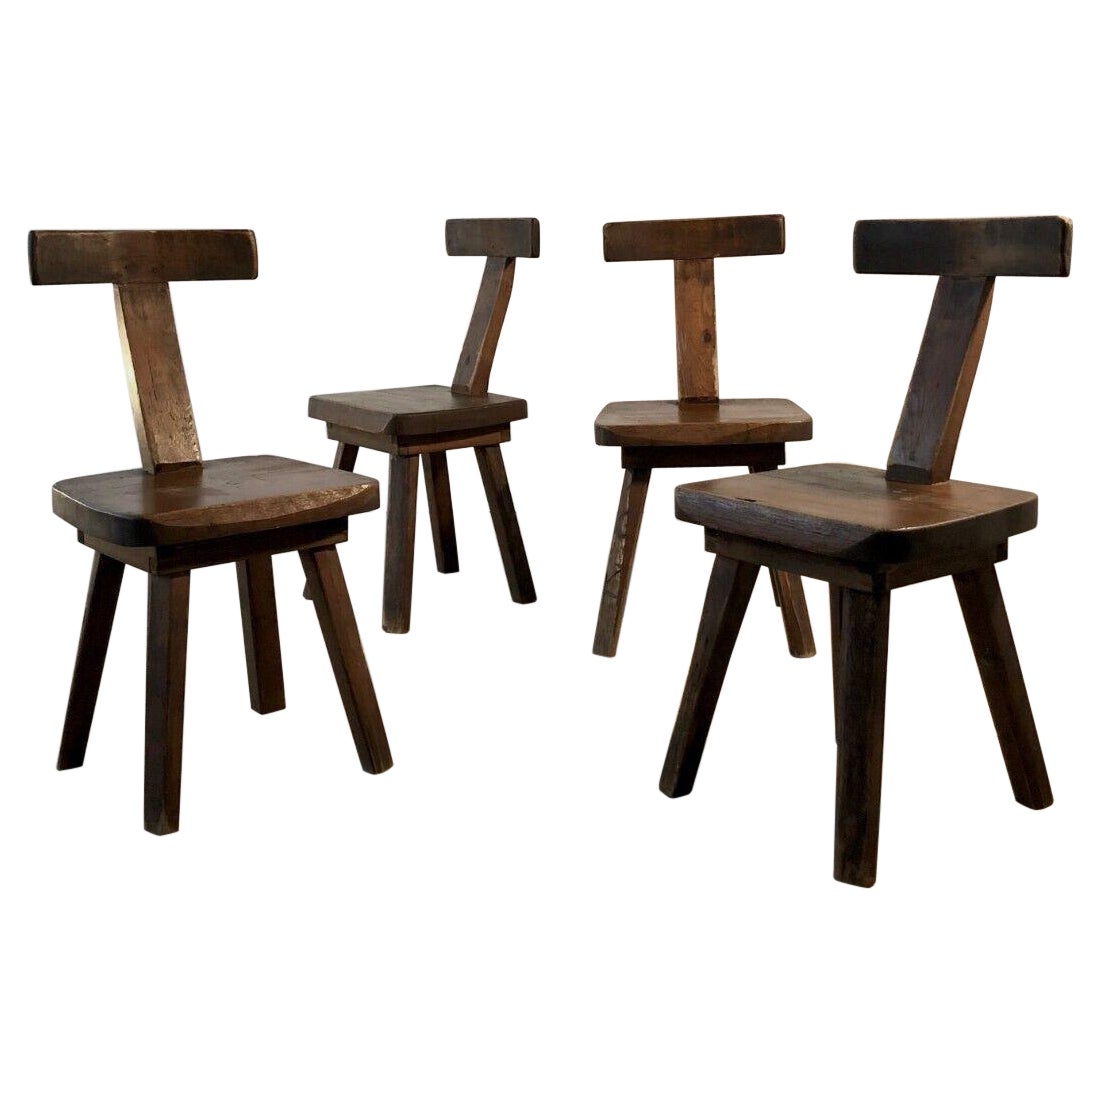 A Set of 4 BRUTALIST RUSTIC-MODERN MODERNIST "T" CHAIRS, by ARANJOU, France 1950 For Sale